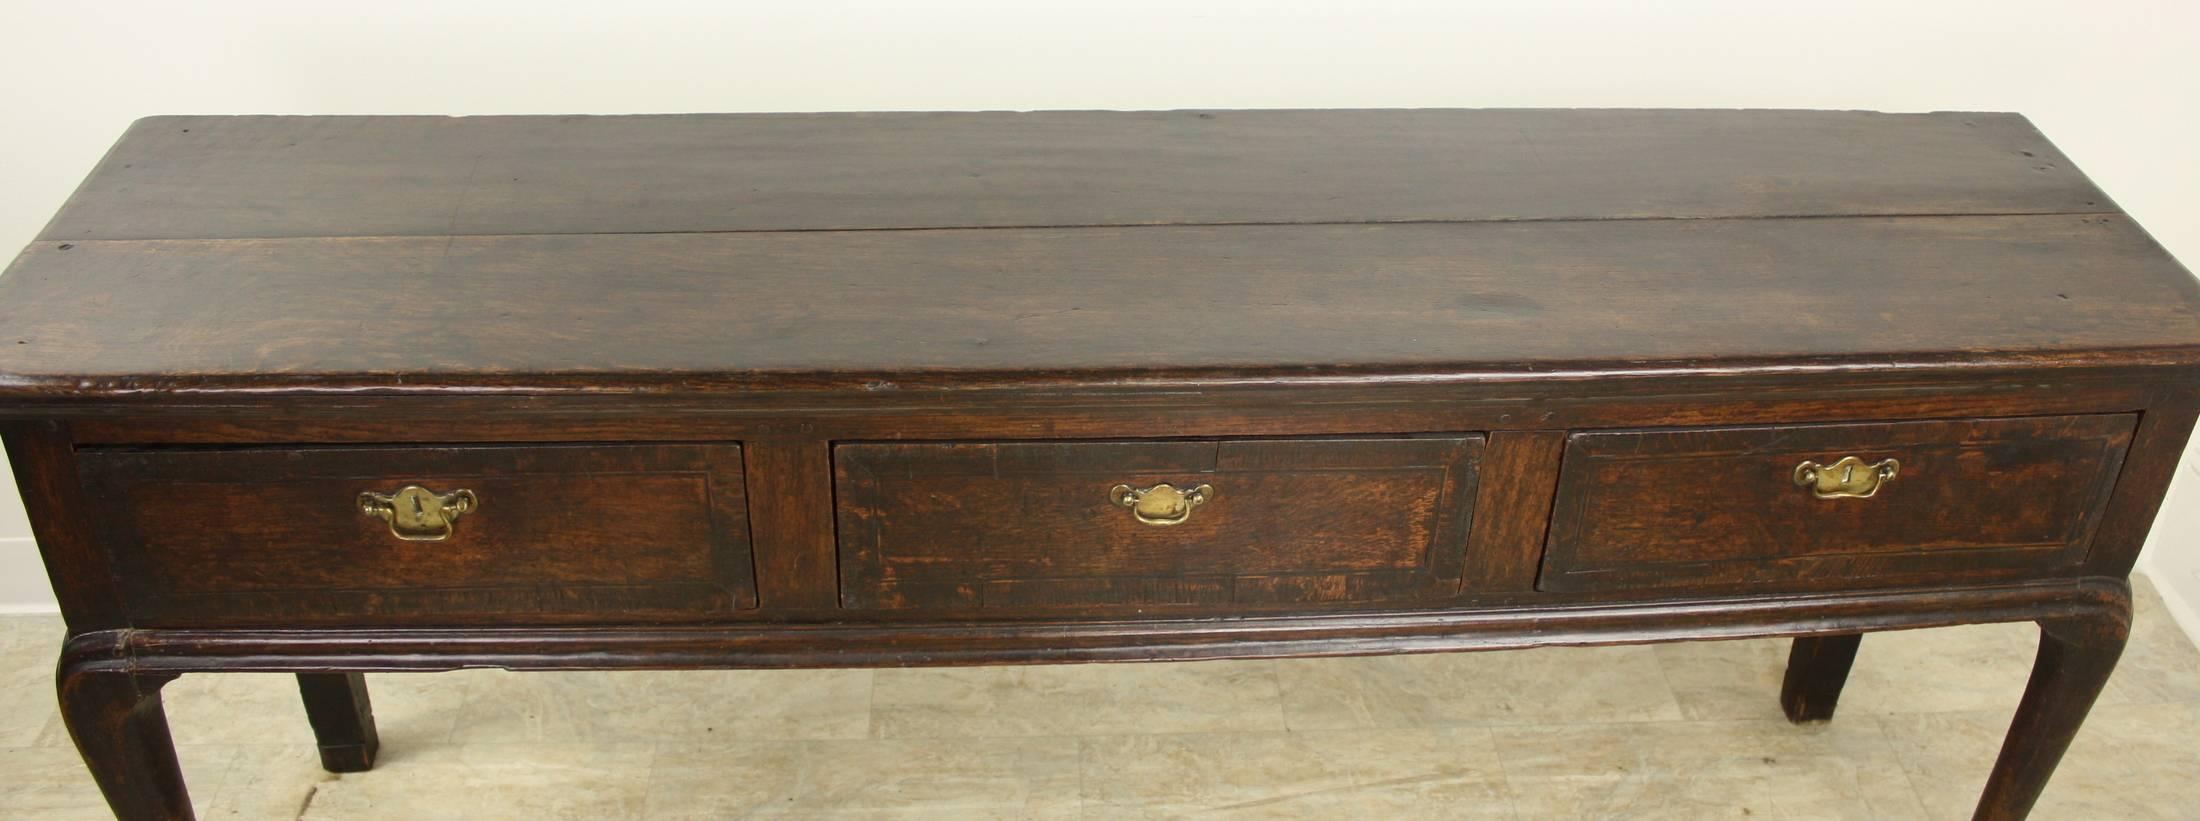 Very Early 18th Century English Oak Console 1